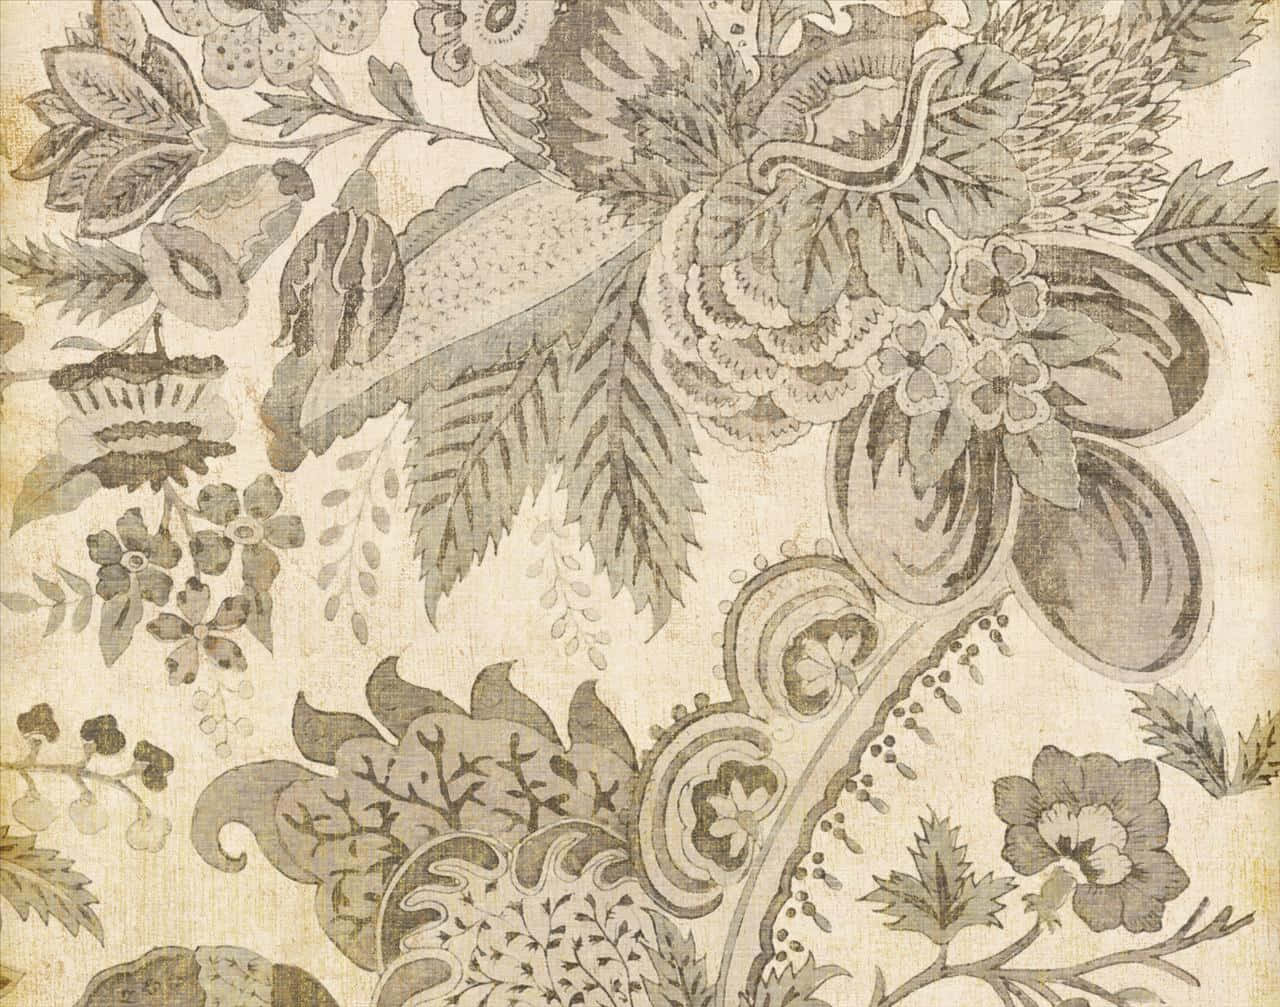 A Beige And Gray Floral Wallpaper With A Floral Pattern